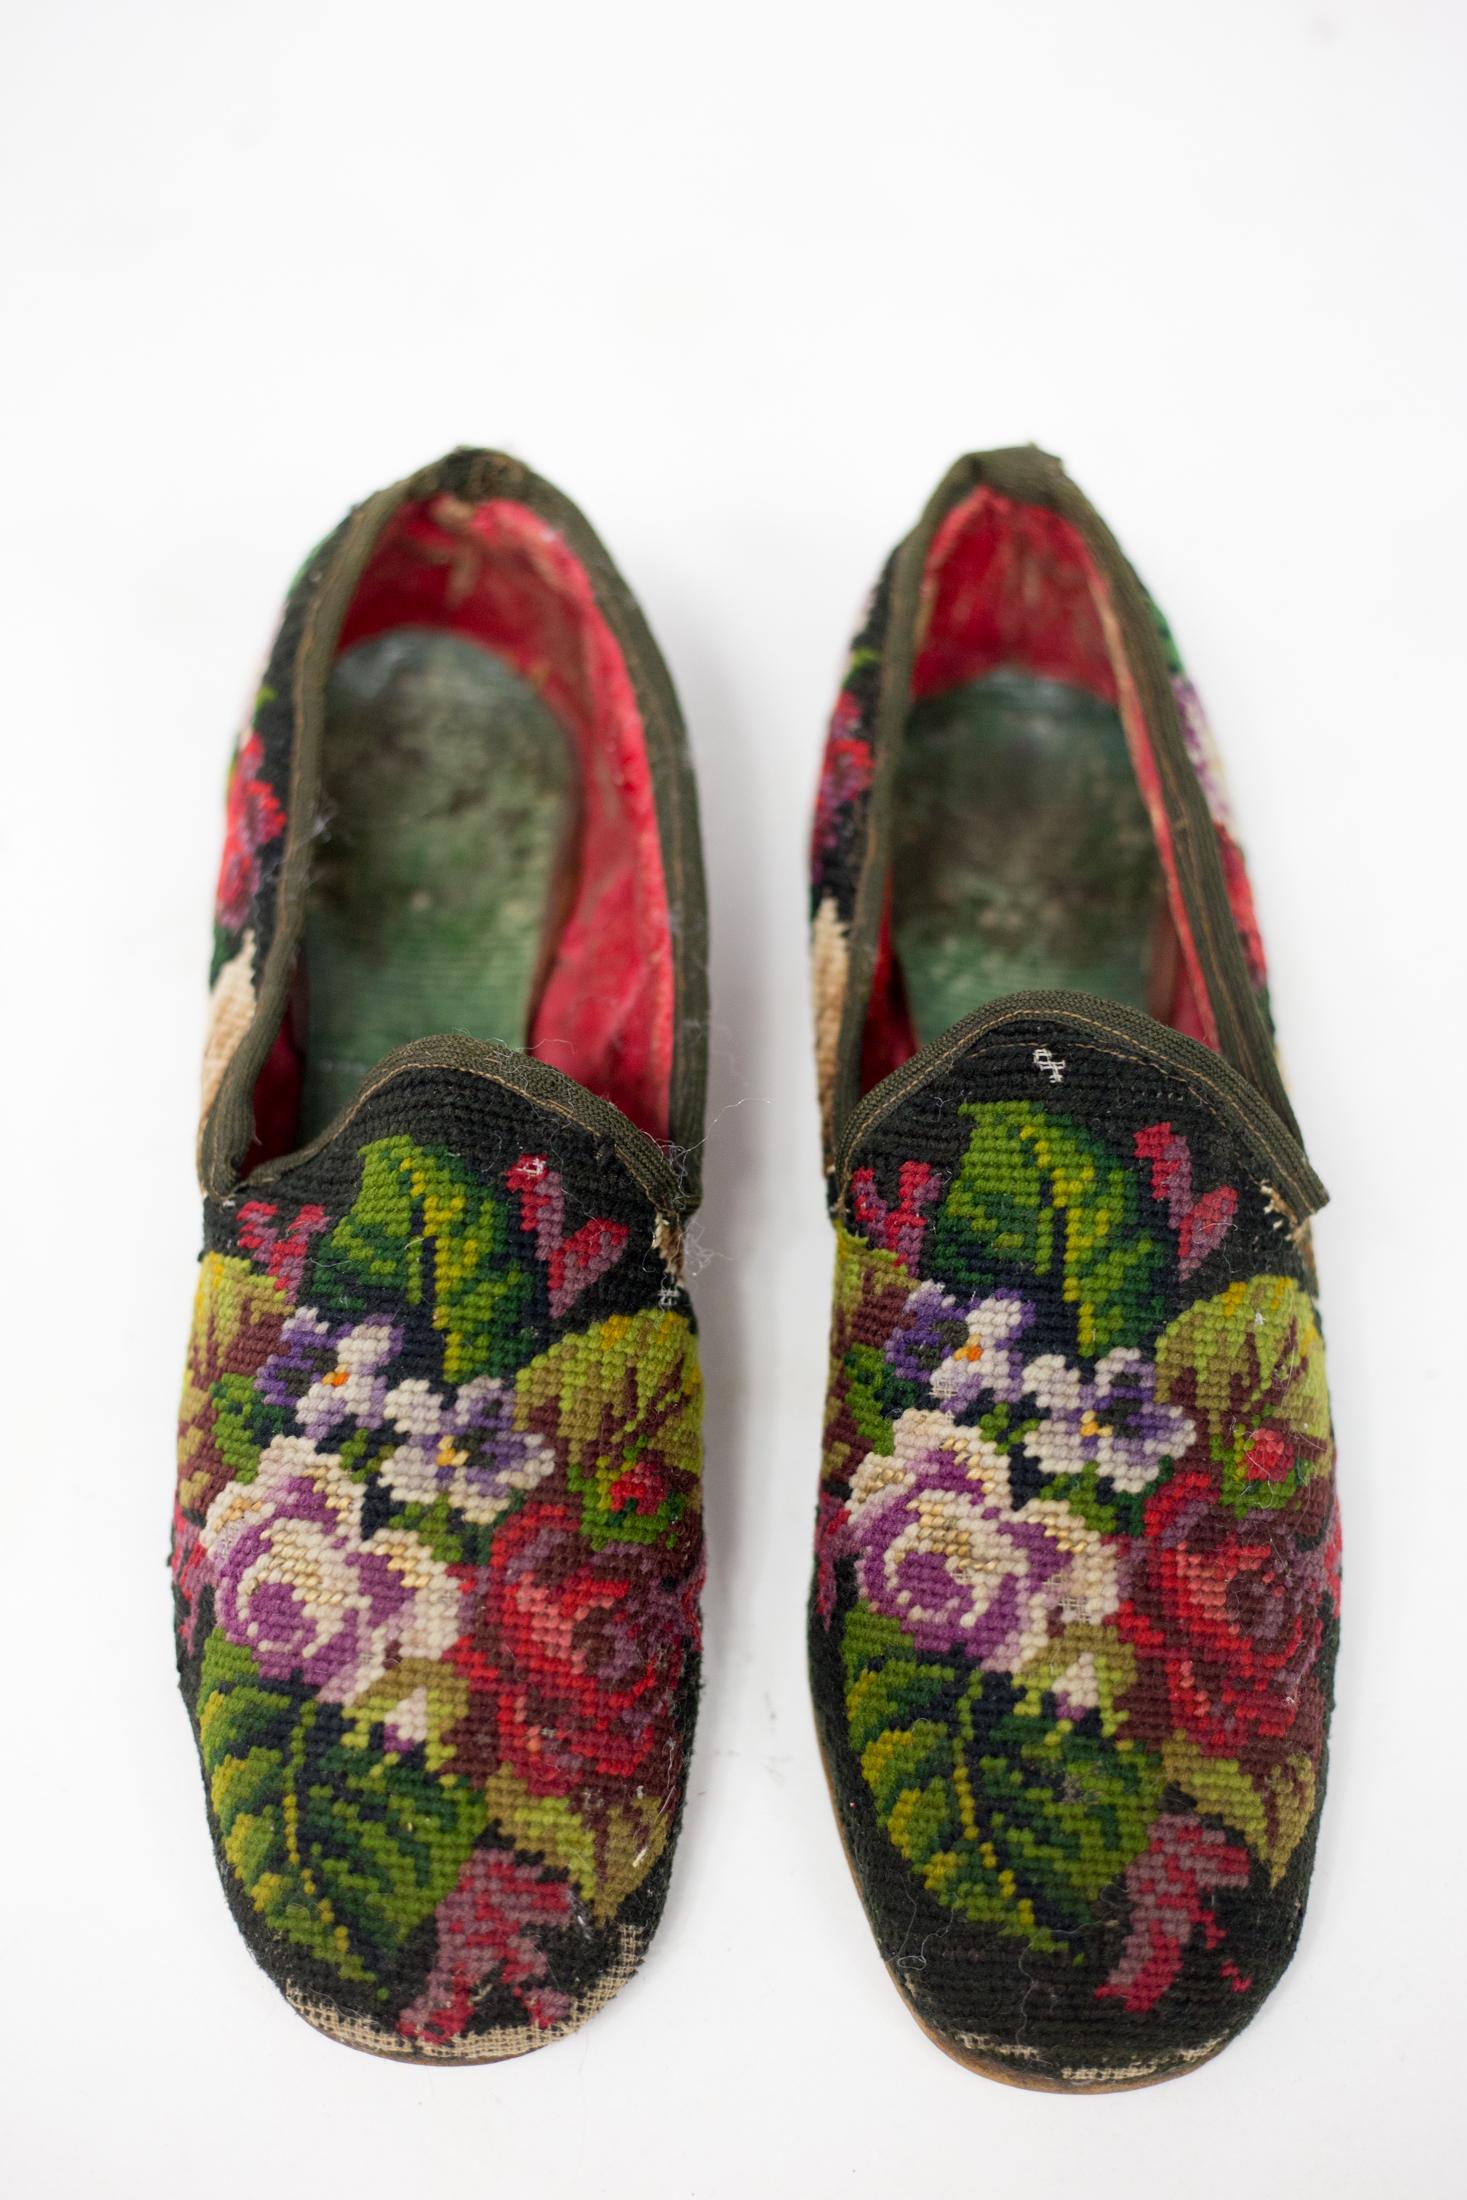 Black Pair of men's slippers in stitch point tapestry - France Circa 1860